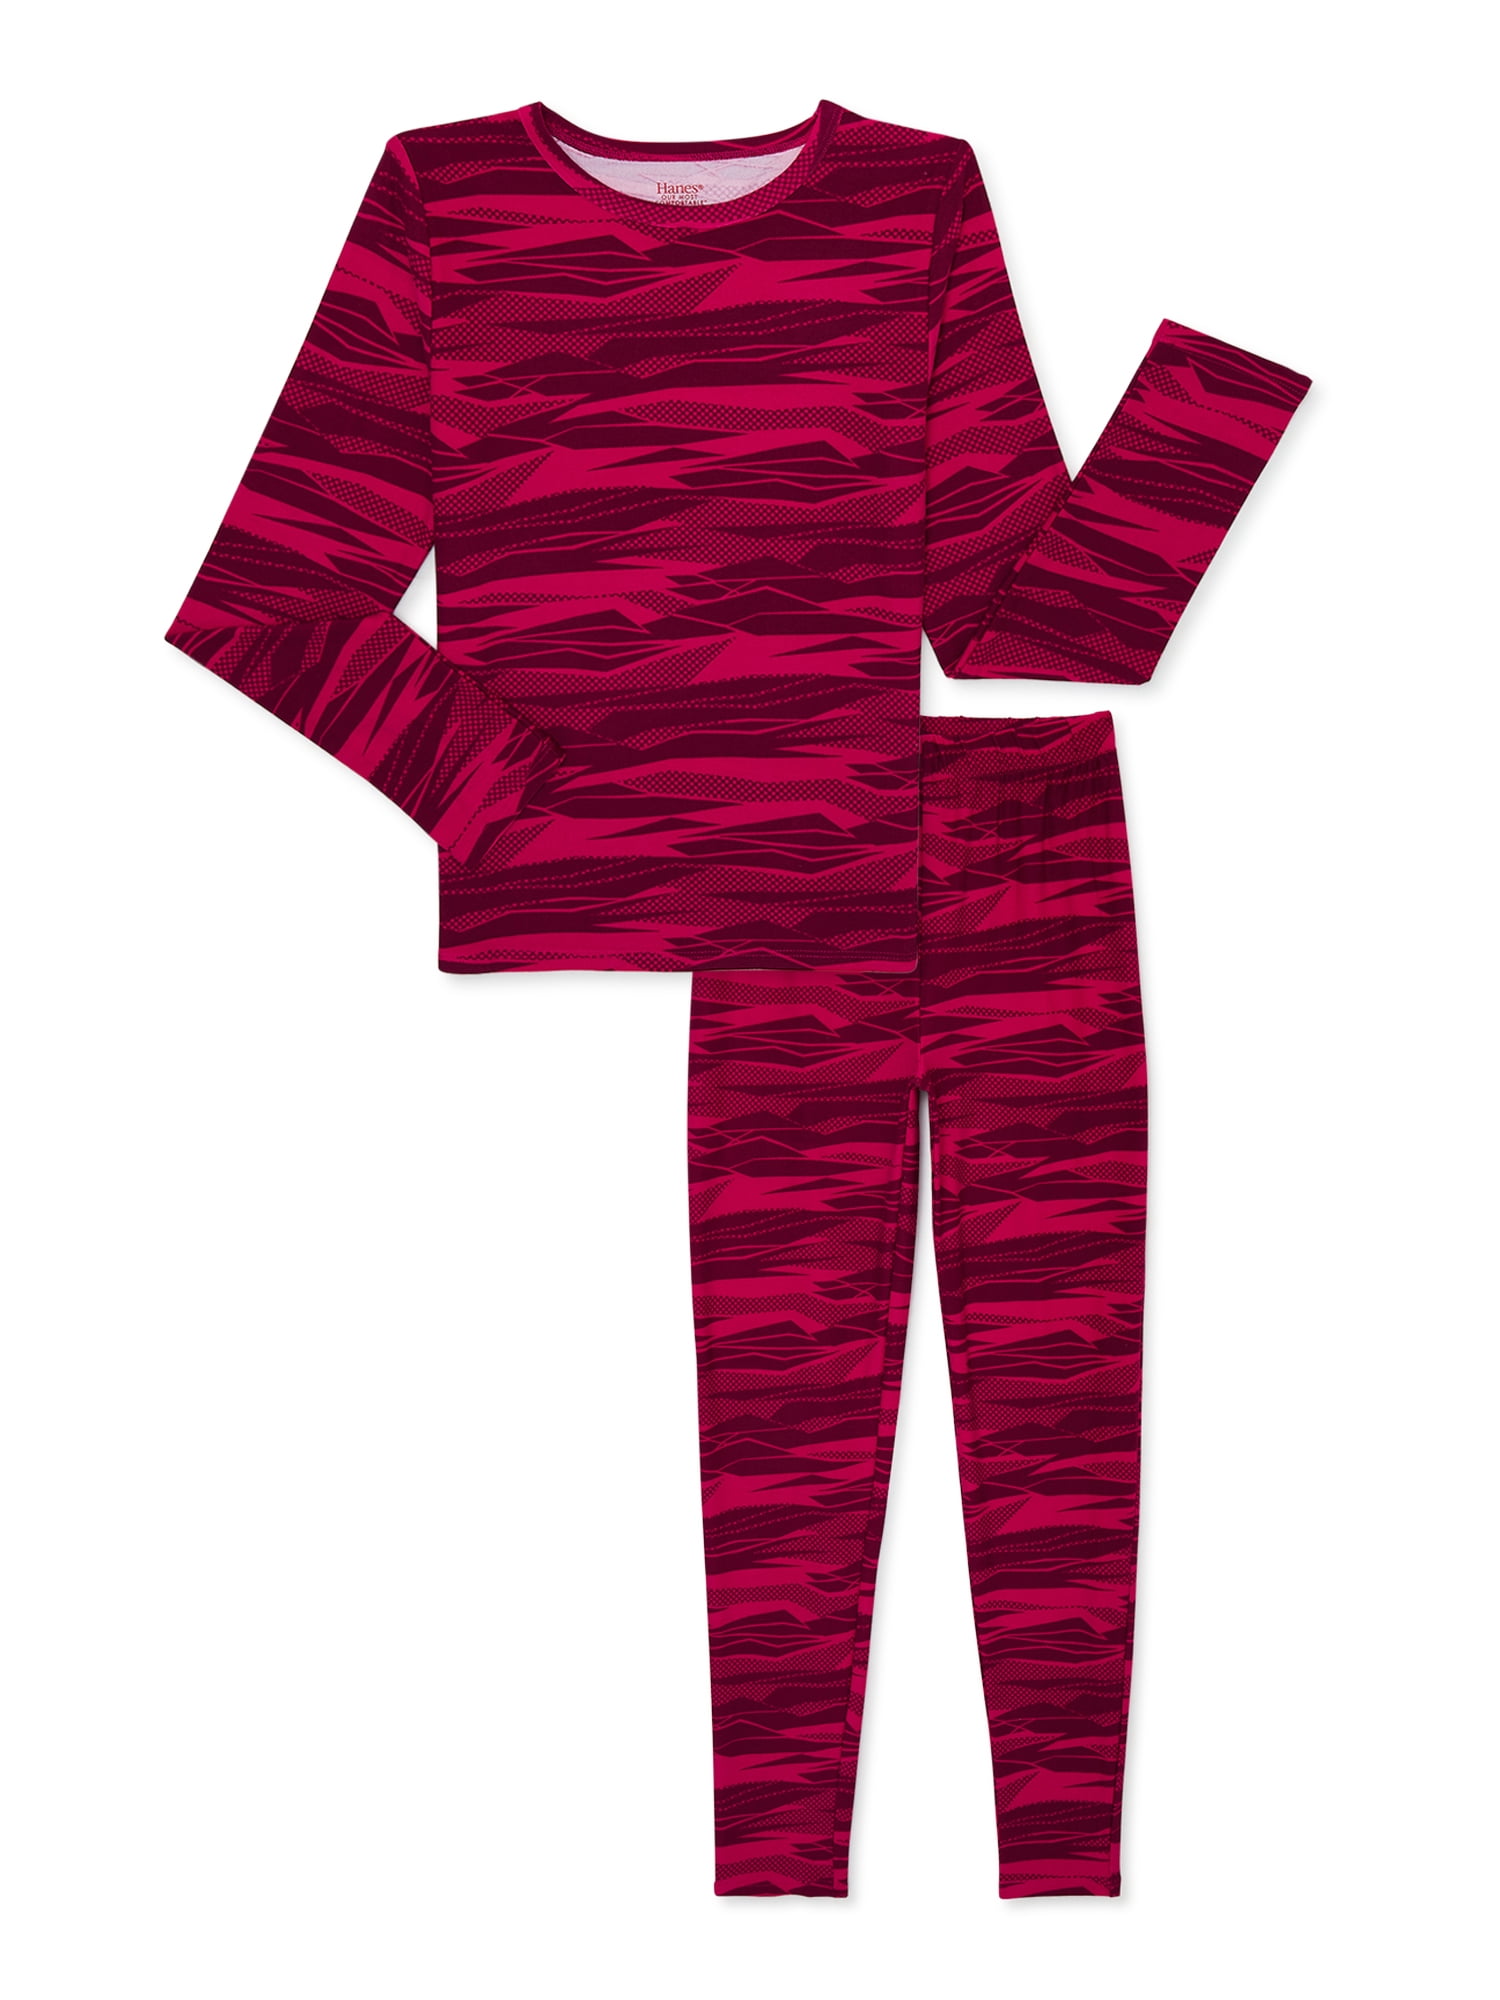 2-Piece Hanes Girls' or Boys' Thermal Top & Bottom Sets (Various) $4.30 + Free S&H w/ Walmart+ or $35+